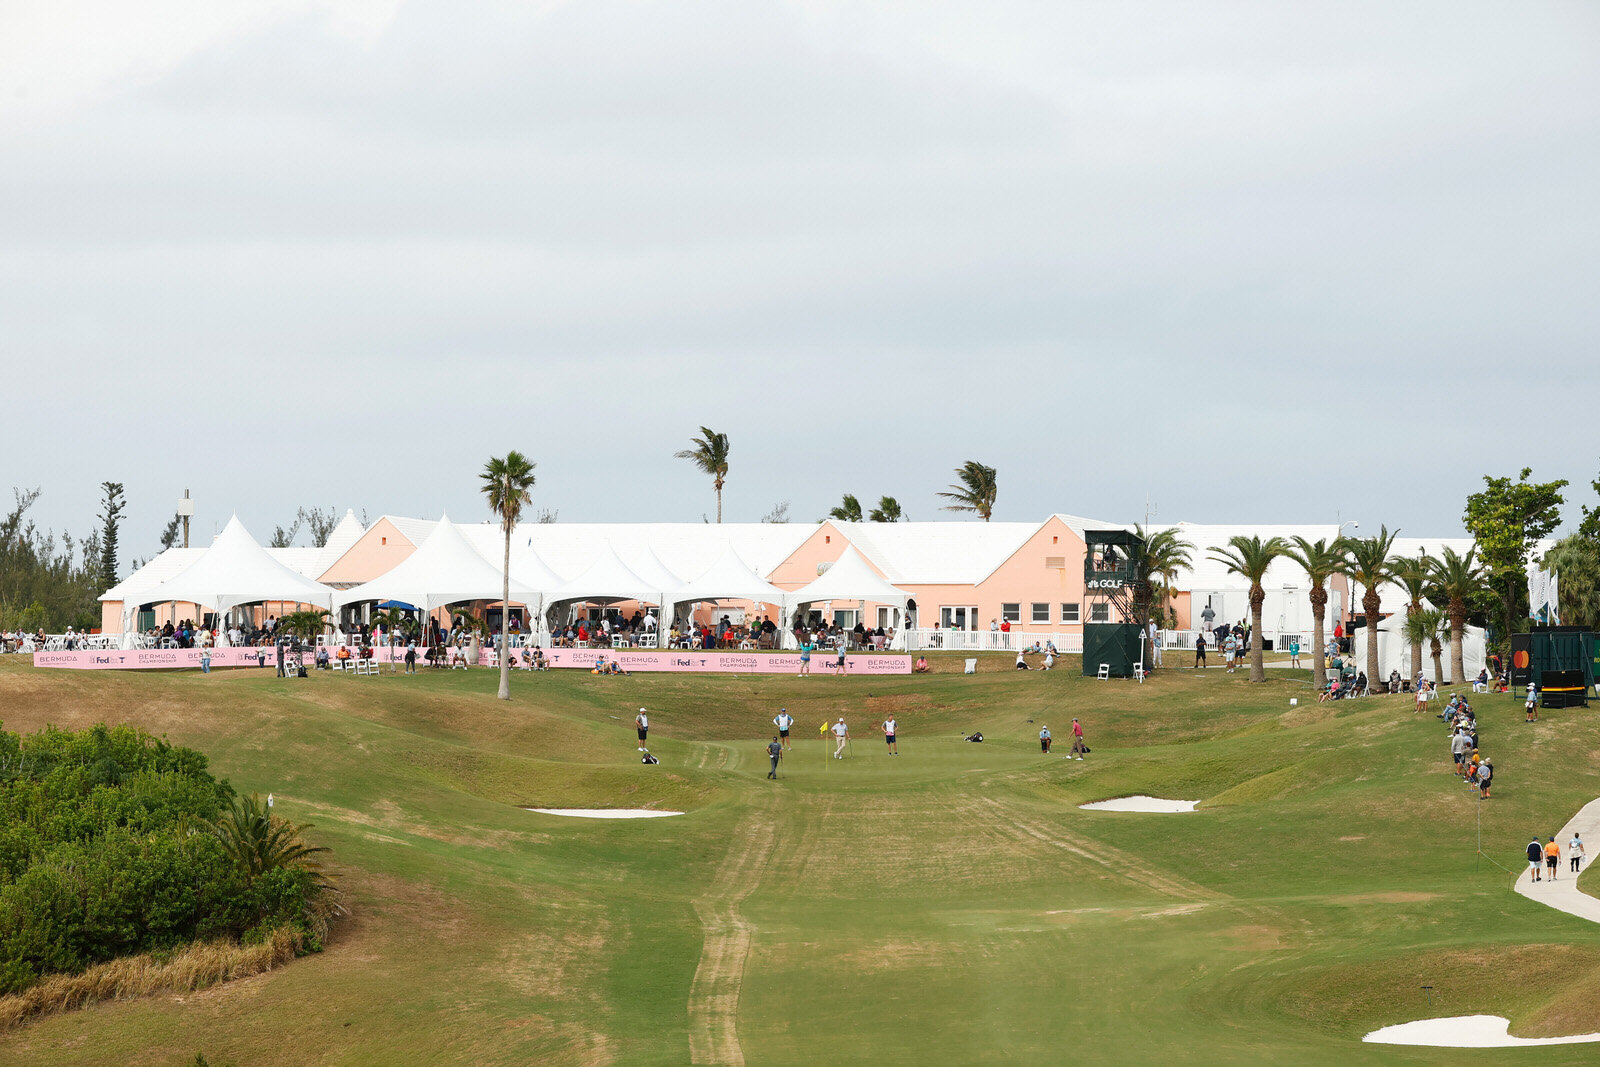  SOUTHAMPTON, BERMUDA - OCTOBER 31: A general view on the 18th green during the third round of the Bermuda Championship at Port Royal Golf Course on October 31, 2020 in Southampton, Bermuda. (Photo by Gregory Shamus/Getty Images) 